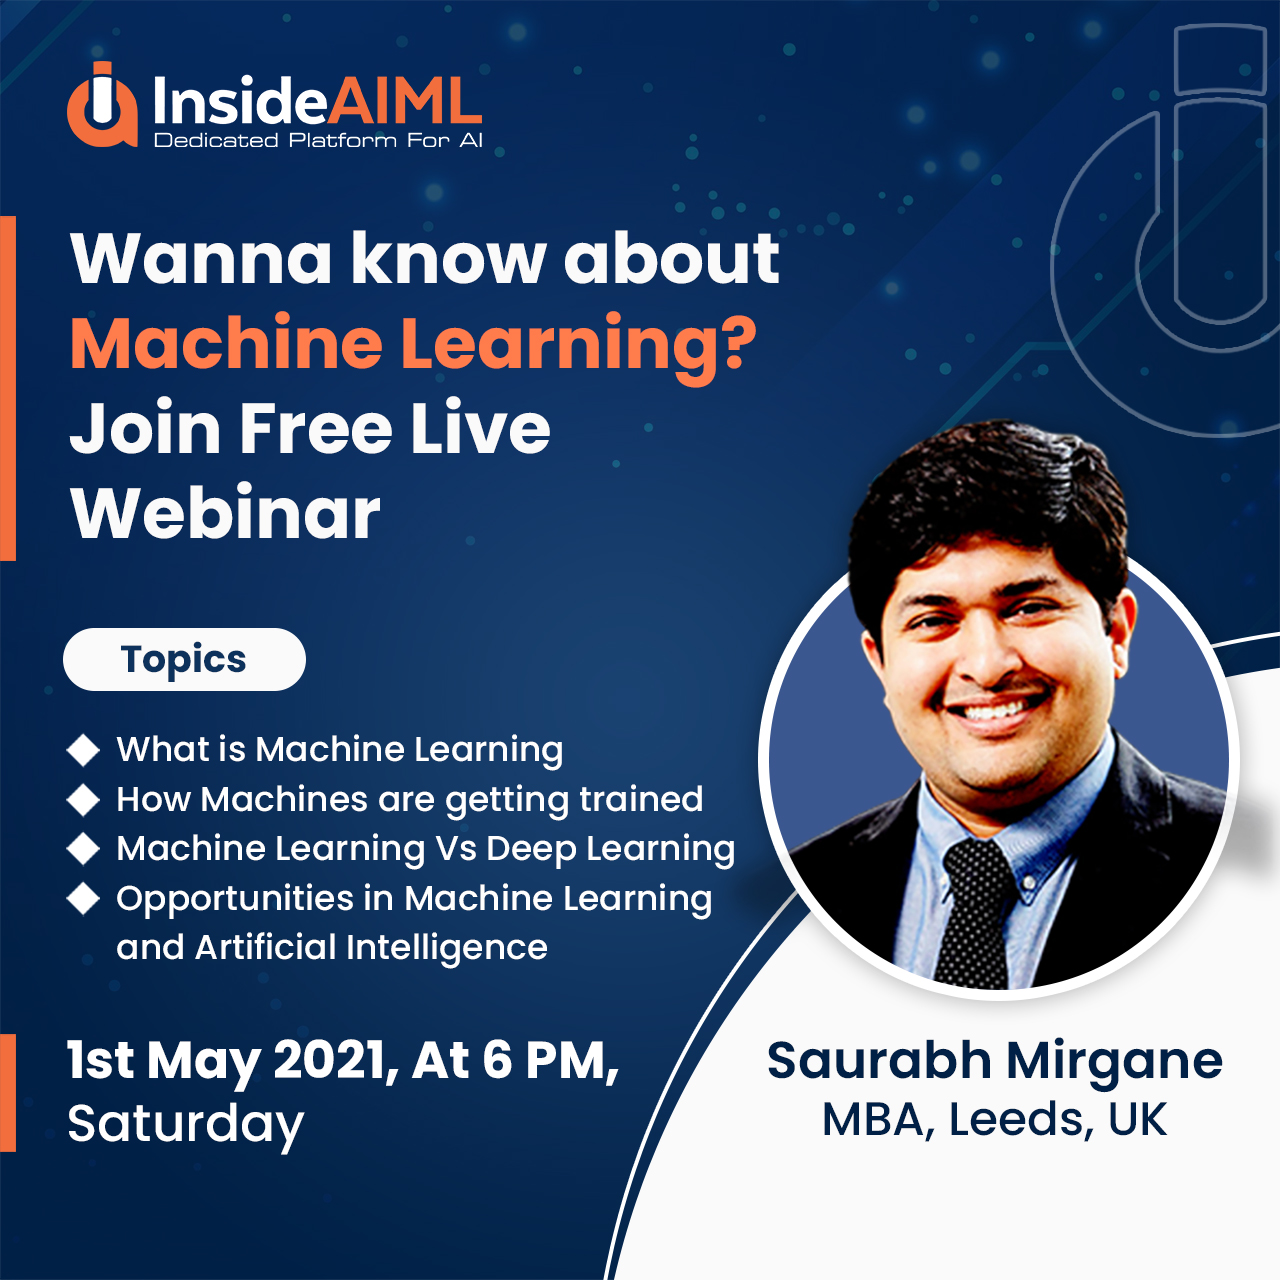 Insideaiml  is hosting Free Webinar with IBM on "Opportunities in Machine Learning", Pune, Maharashtra, India